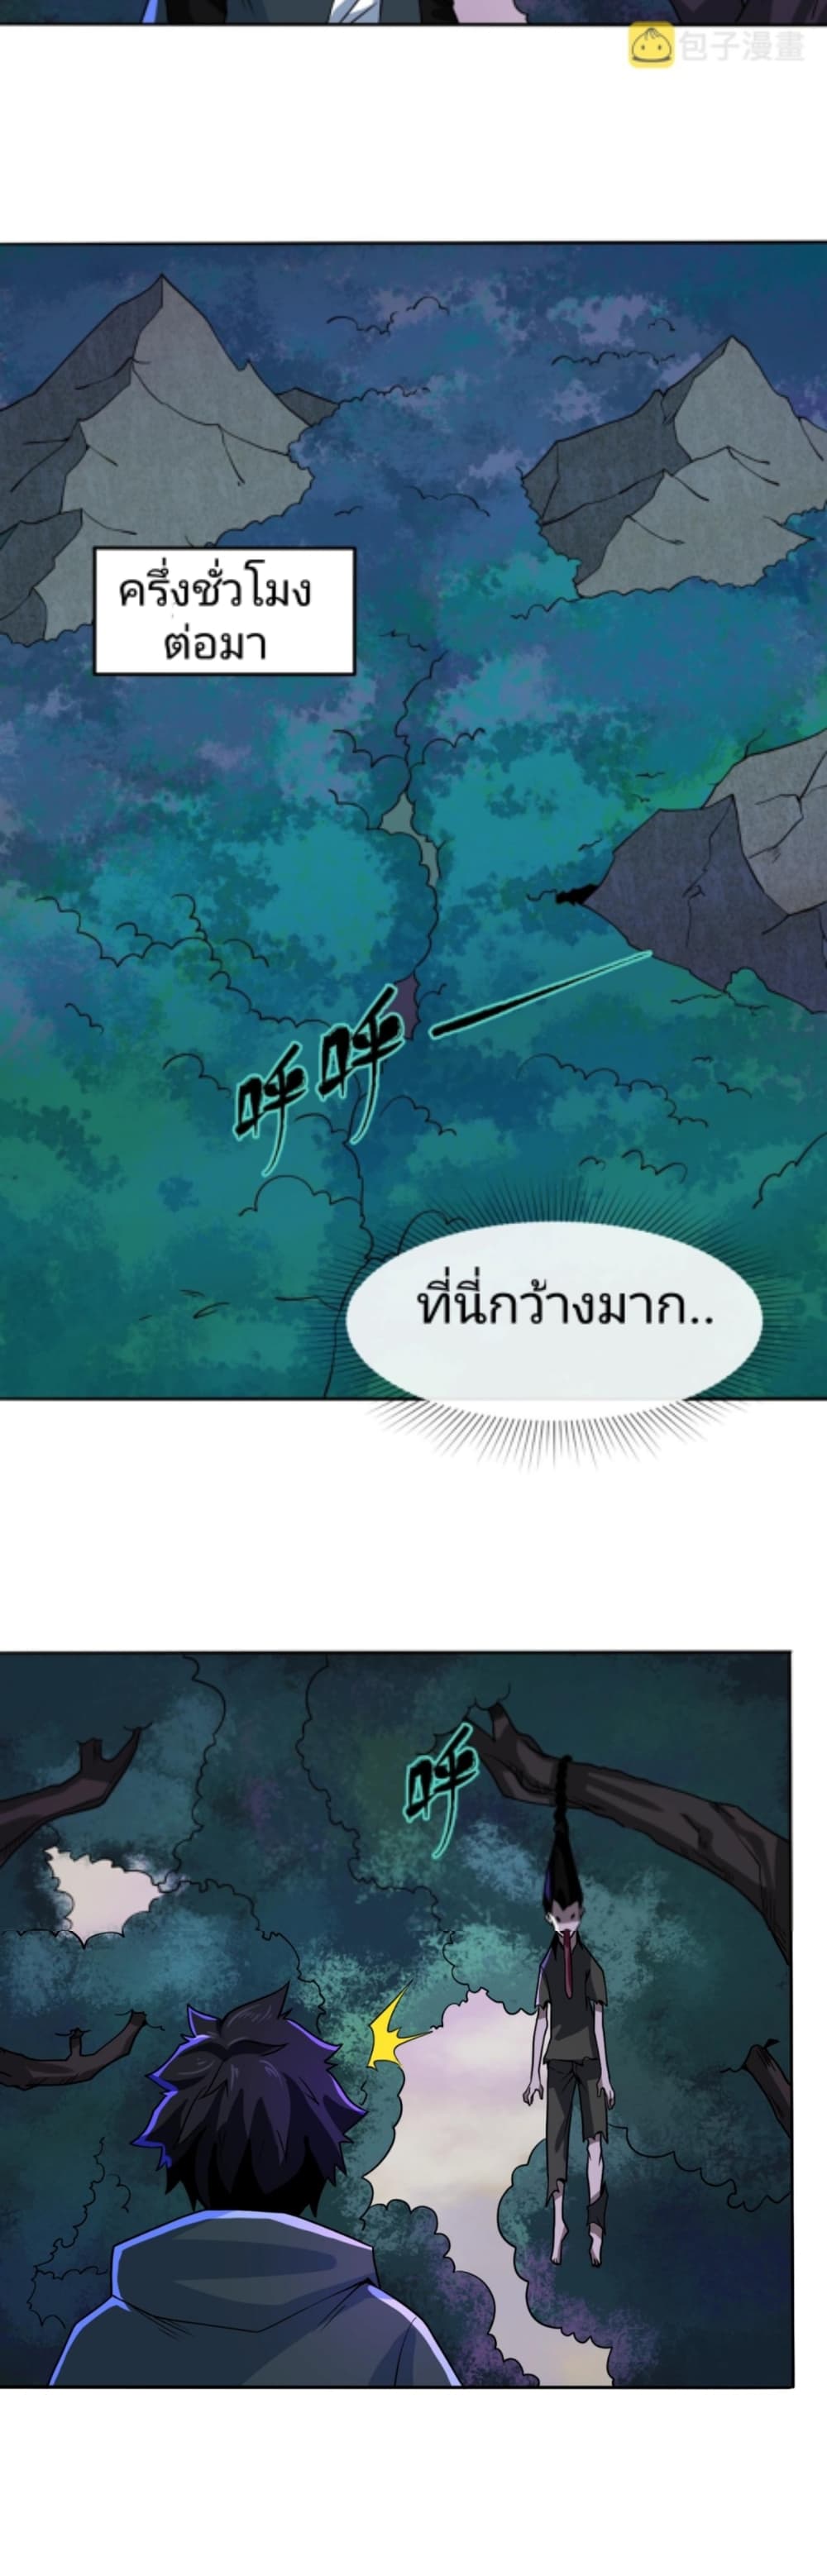 The Age of Ghost Spirits à¸à¸­à¸à¸à¸µà¹ 8 (34)